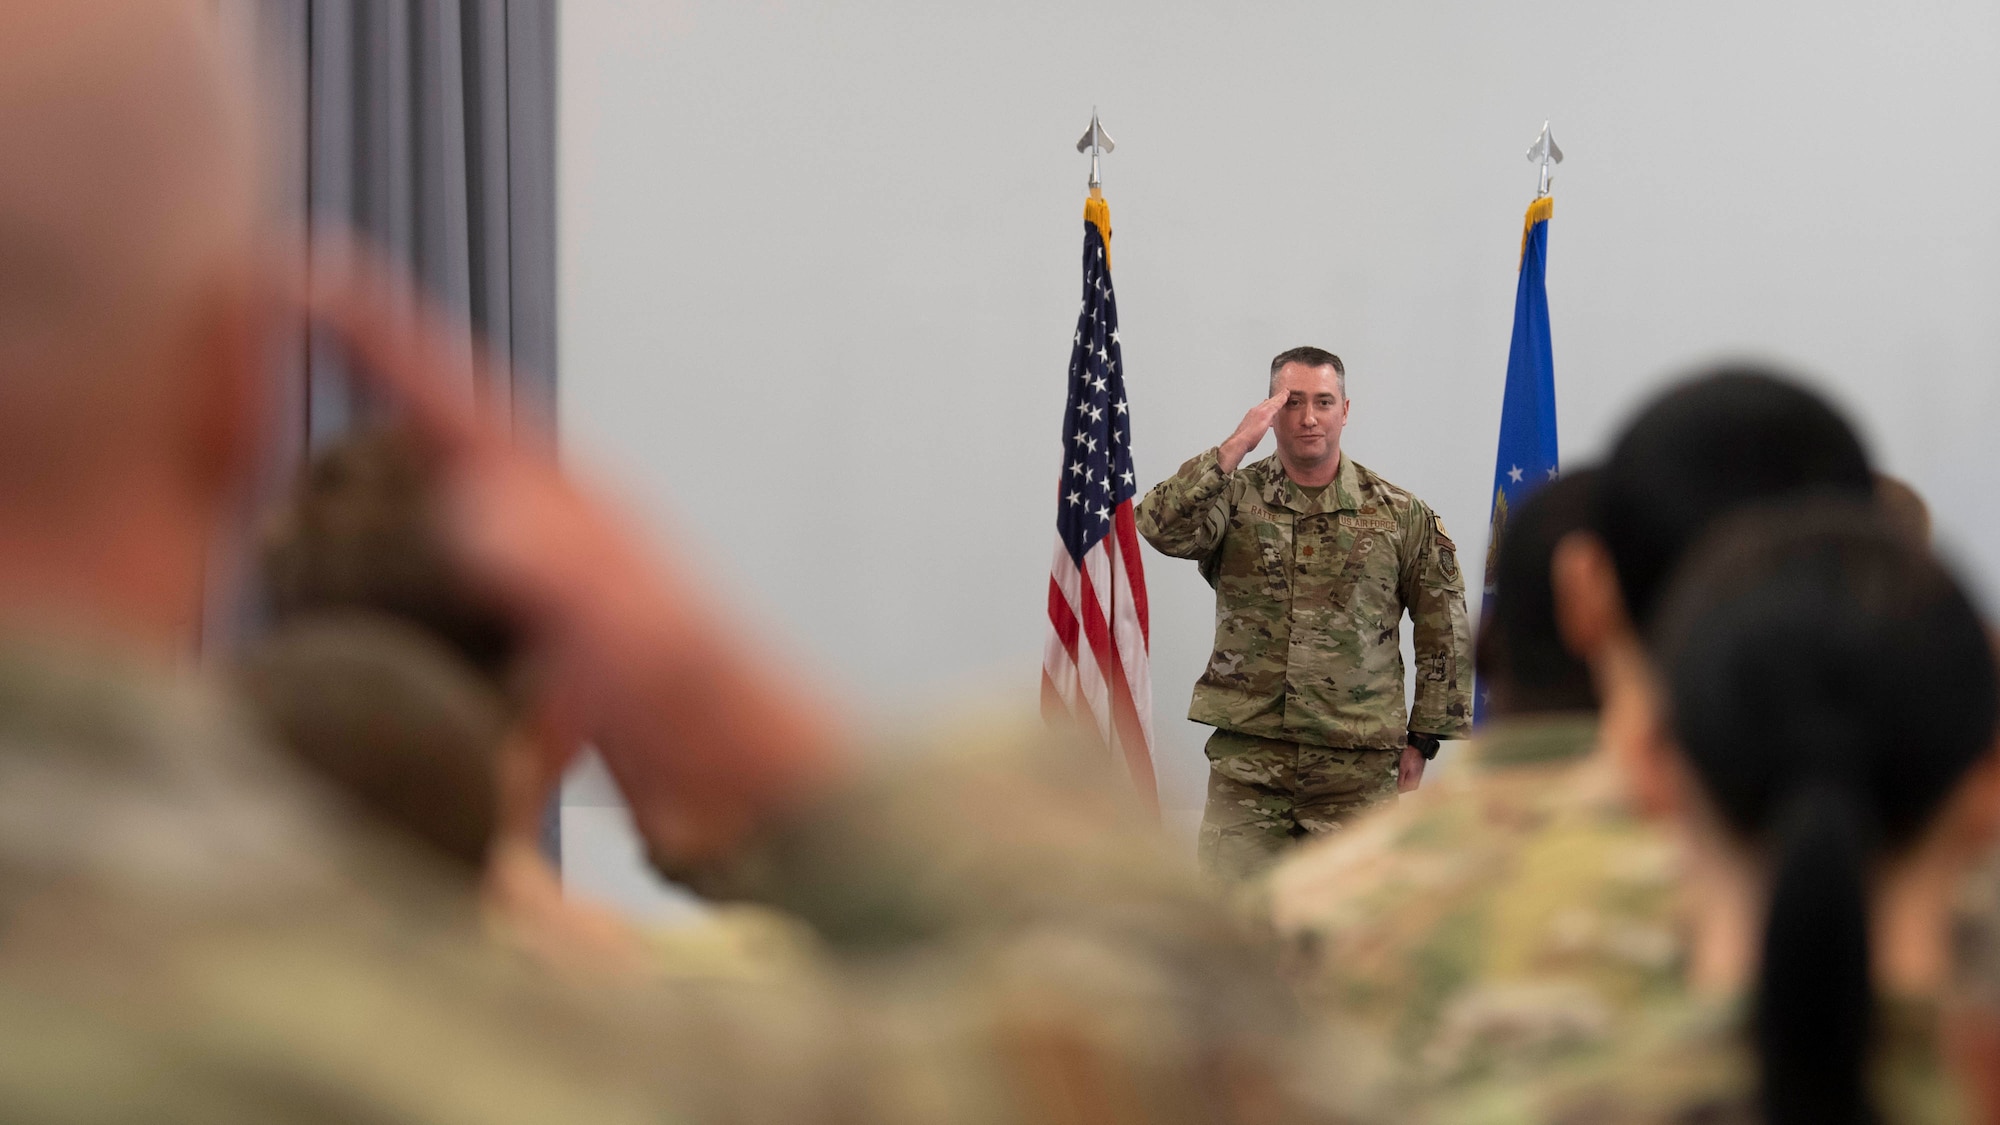 Maj. David Ratté, 436th Security Forces Squadron commander, receives a first salute from his unit during a change of command ceremony held at The Landings on Dover Air Force Base, Delaware, June 21, 2022. Ratté was previously the 768th Expeditionary Air Base Squadron defense force commander. (U.S. Air Force photo by TSgt. J.D. Strong II)